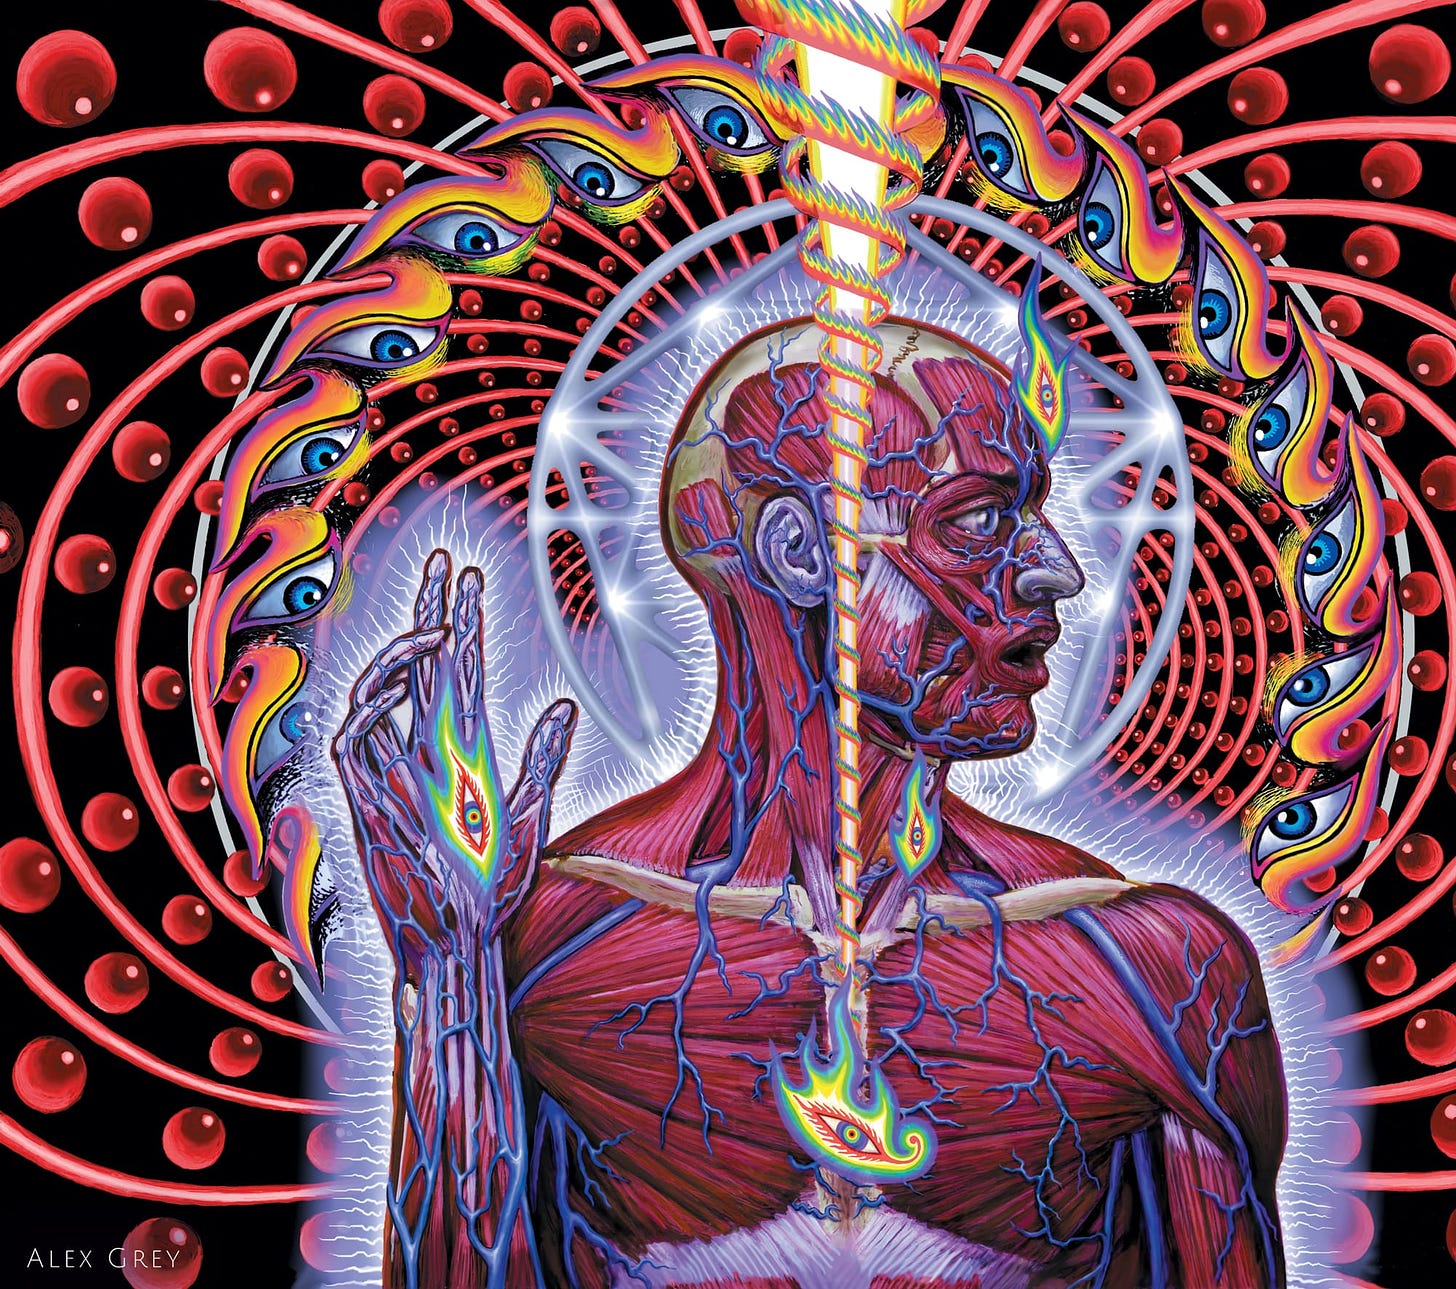 Dissectional Art for Tool's Lateralus CD by Alex Grey